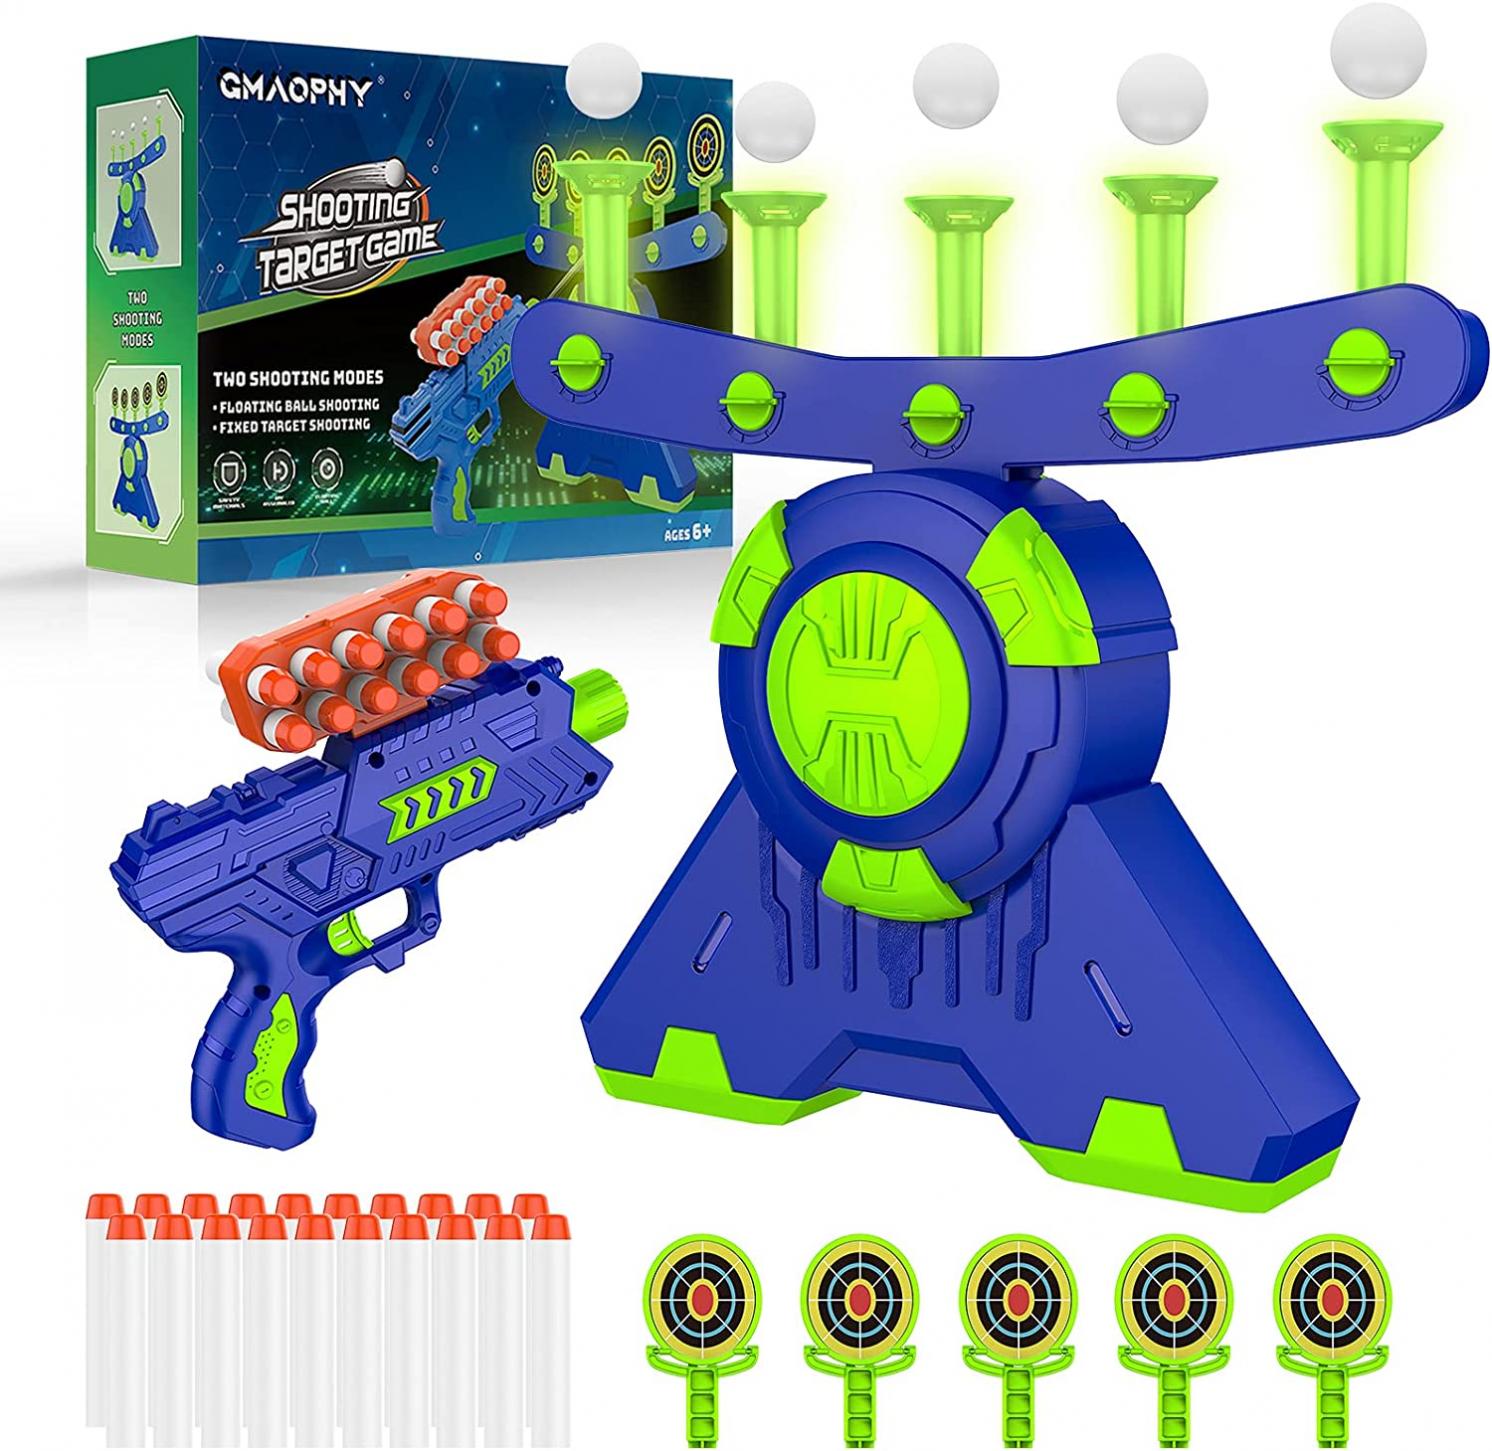 GMAOPHY Shooting Games Toy Gift for Age 5, 6, 7, 8, 9, 10+ Years Old Kids, Glow in The Dark Boy Toy Floating Ball Targets with Foam Dart Toy Blaster, 10 Balls 5 Targets